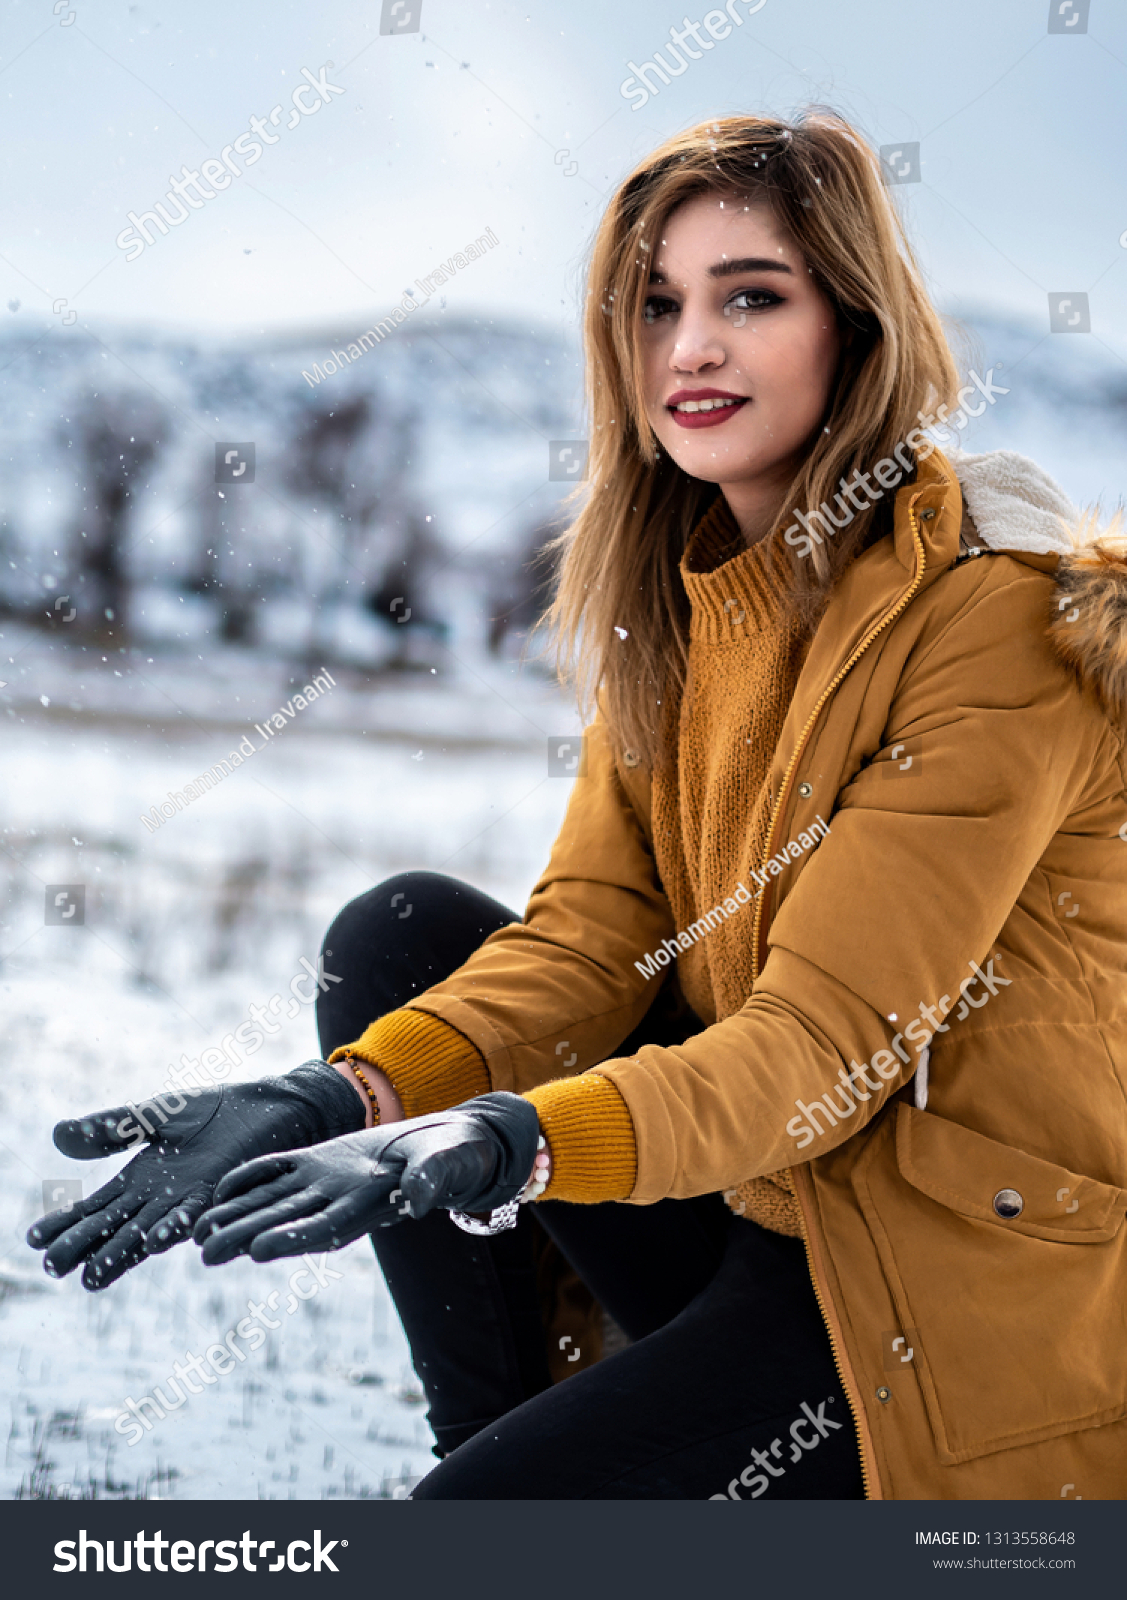 girls leather gloves